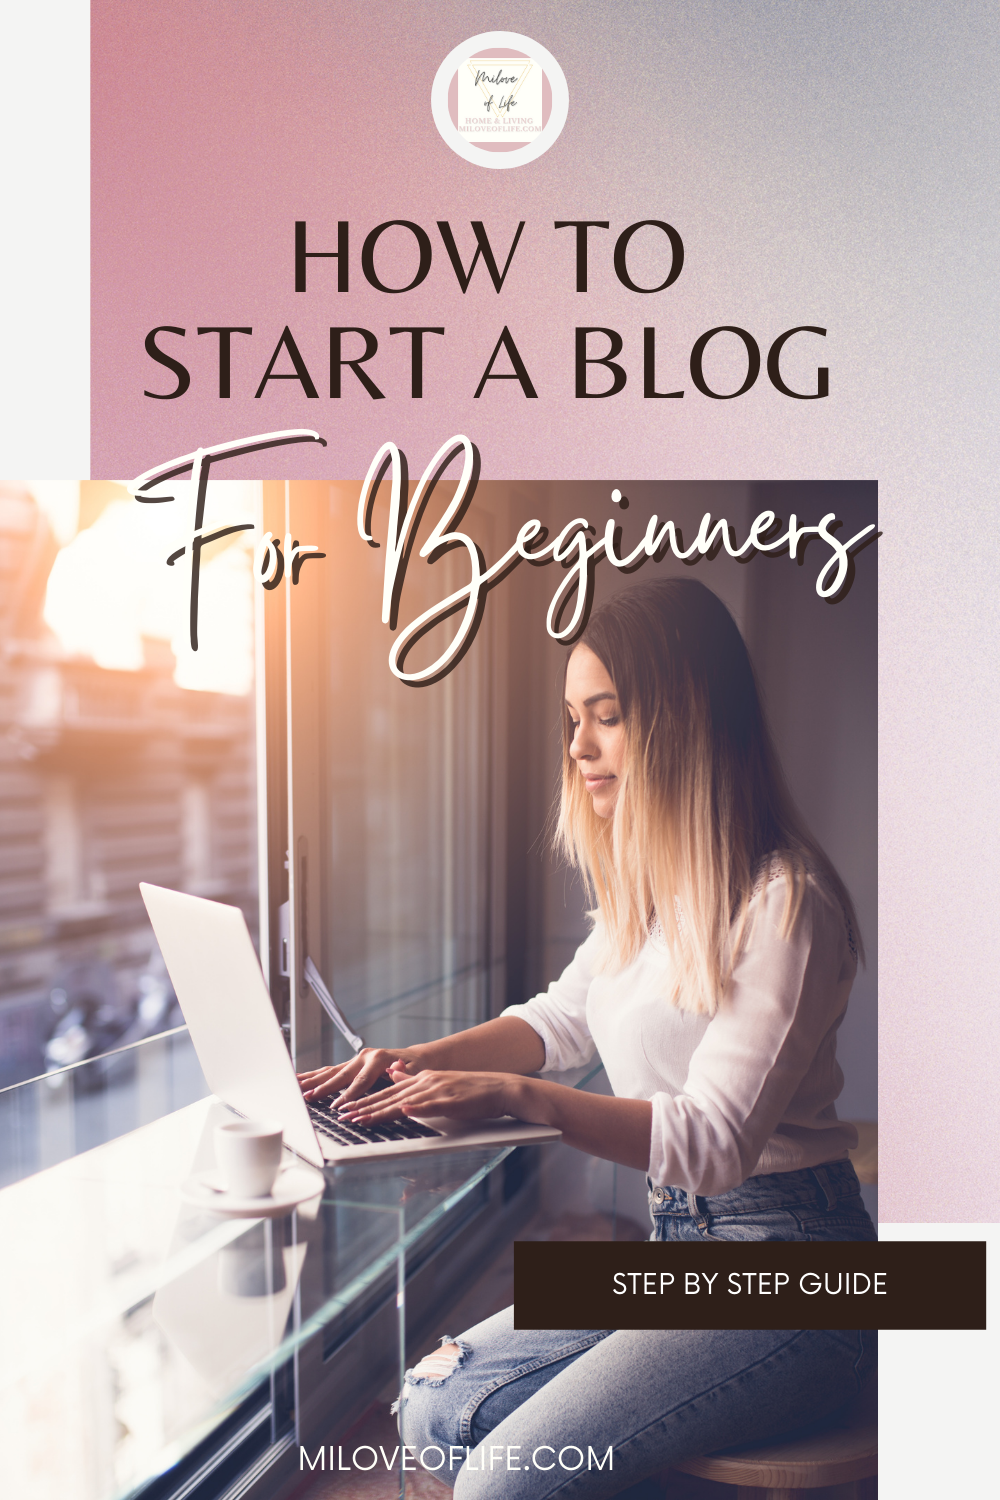 HOW TO START A BLOG: COMPLETE GUIDE FOR BEGINNERS 2021! Miloveoflife.com Milove Of Life Brittney Milove lifestyle blog youtube